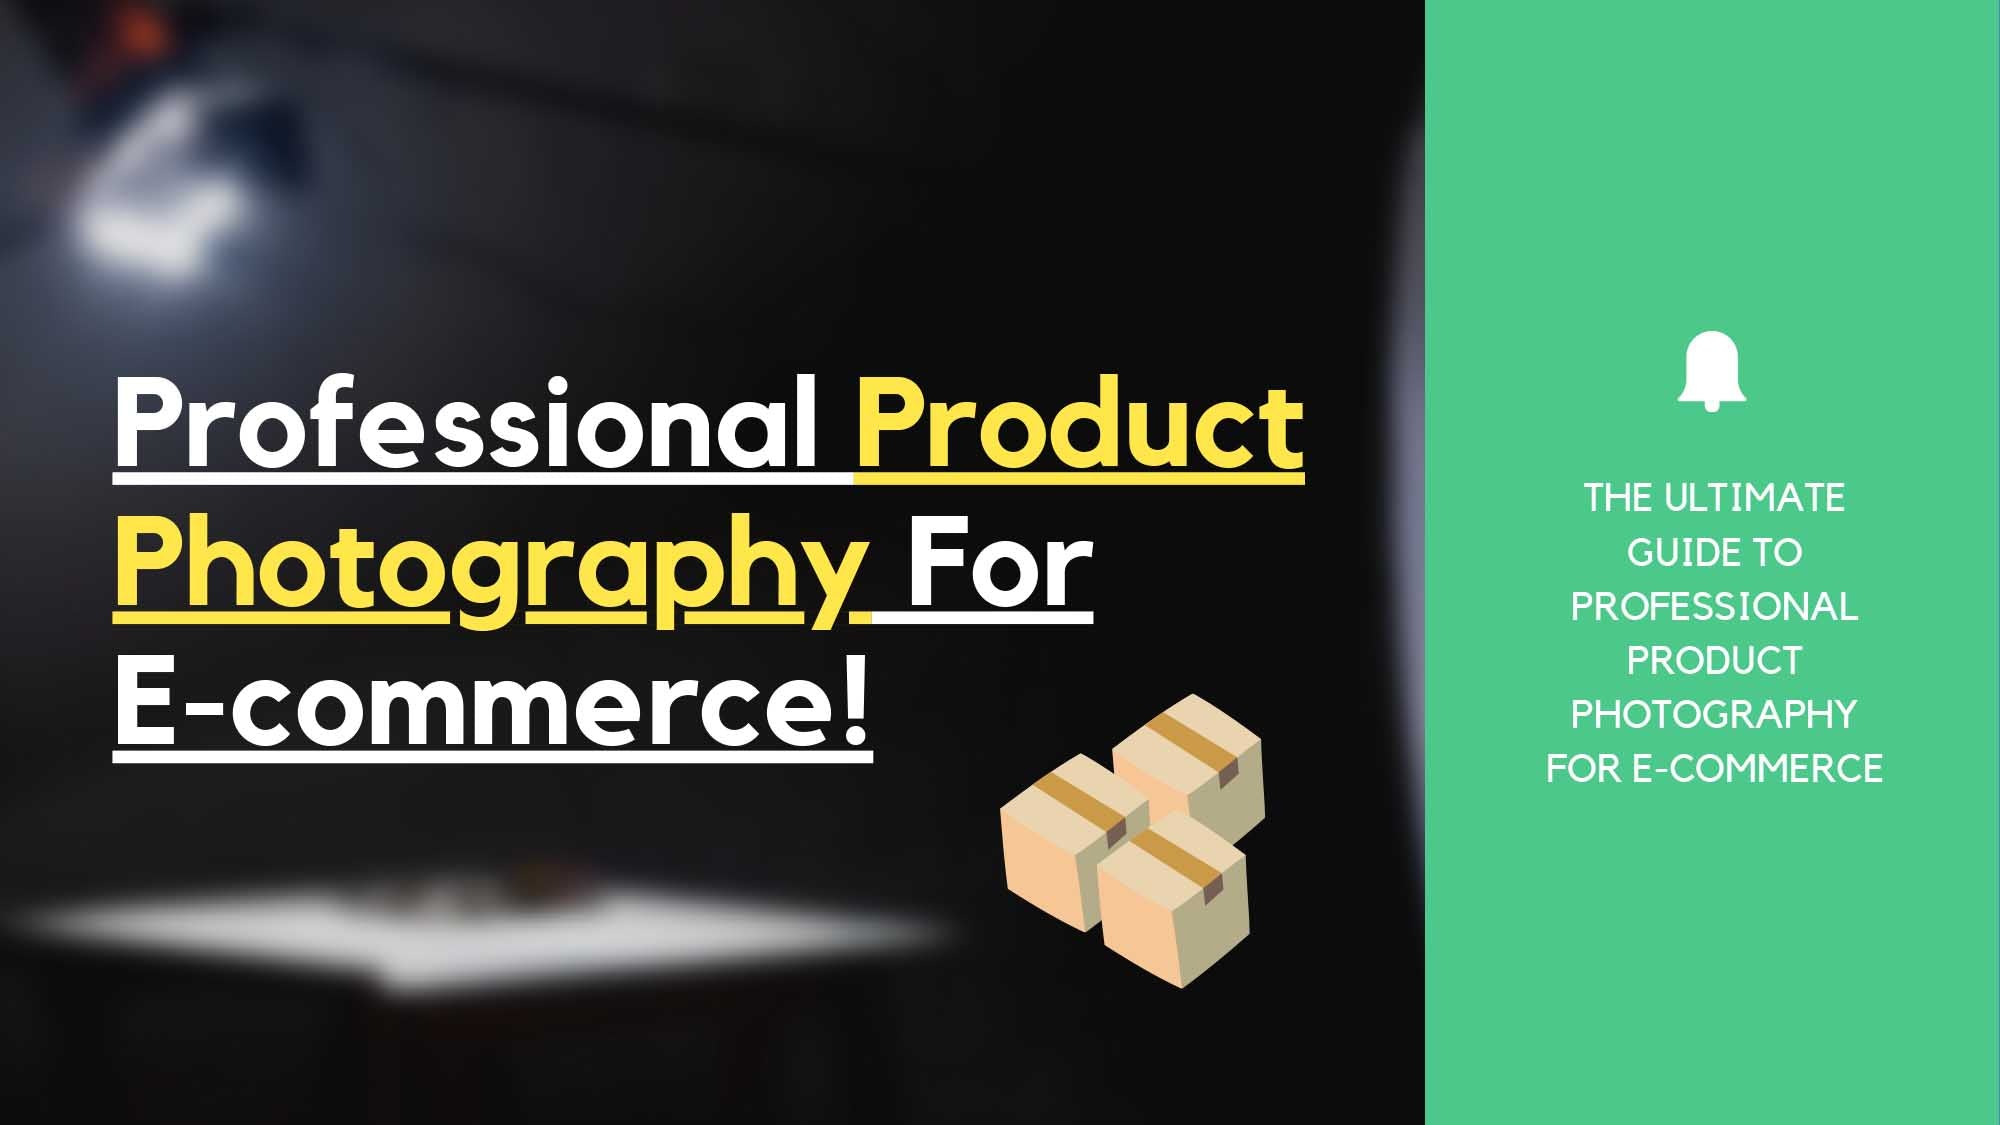 The Ultimate Guide To Professional Product Photography For E-commerce